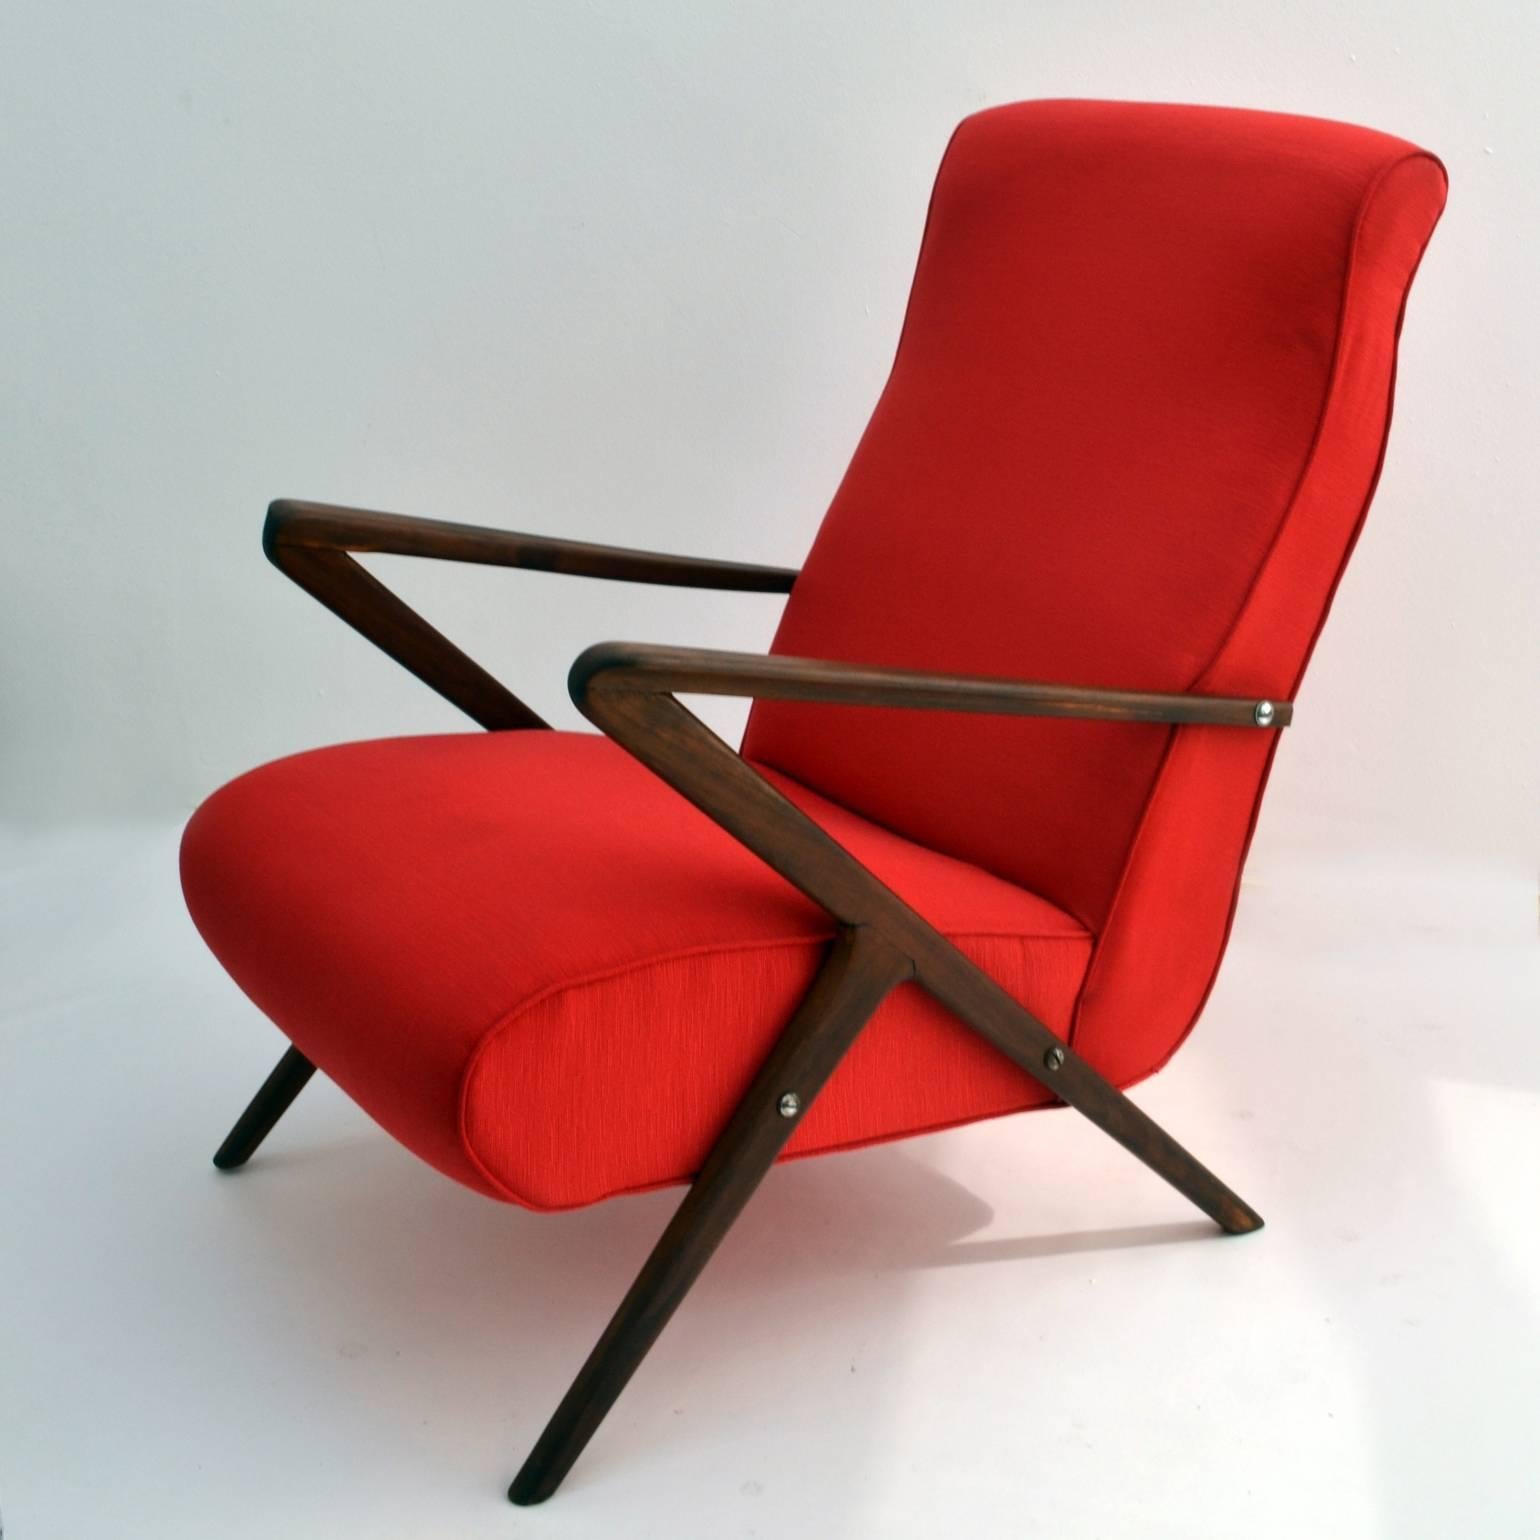 Mid-Century Modern 1950s Pair of Red Italian Lounge Chairs, Mahogany Frame with Pronounced Armrests